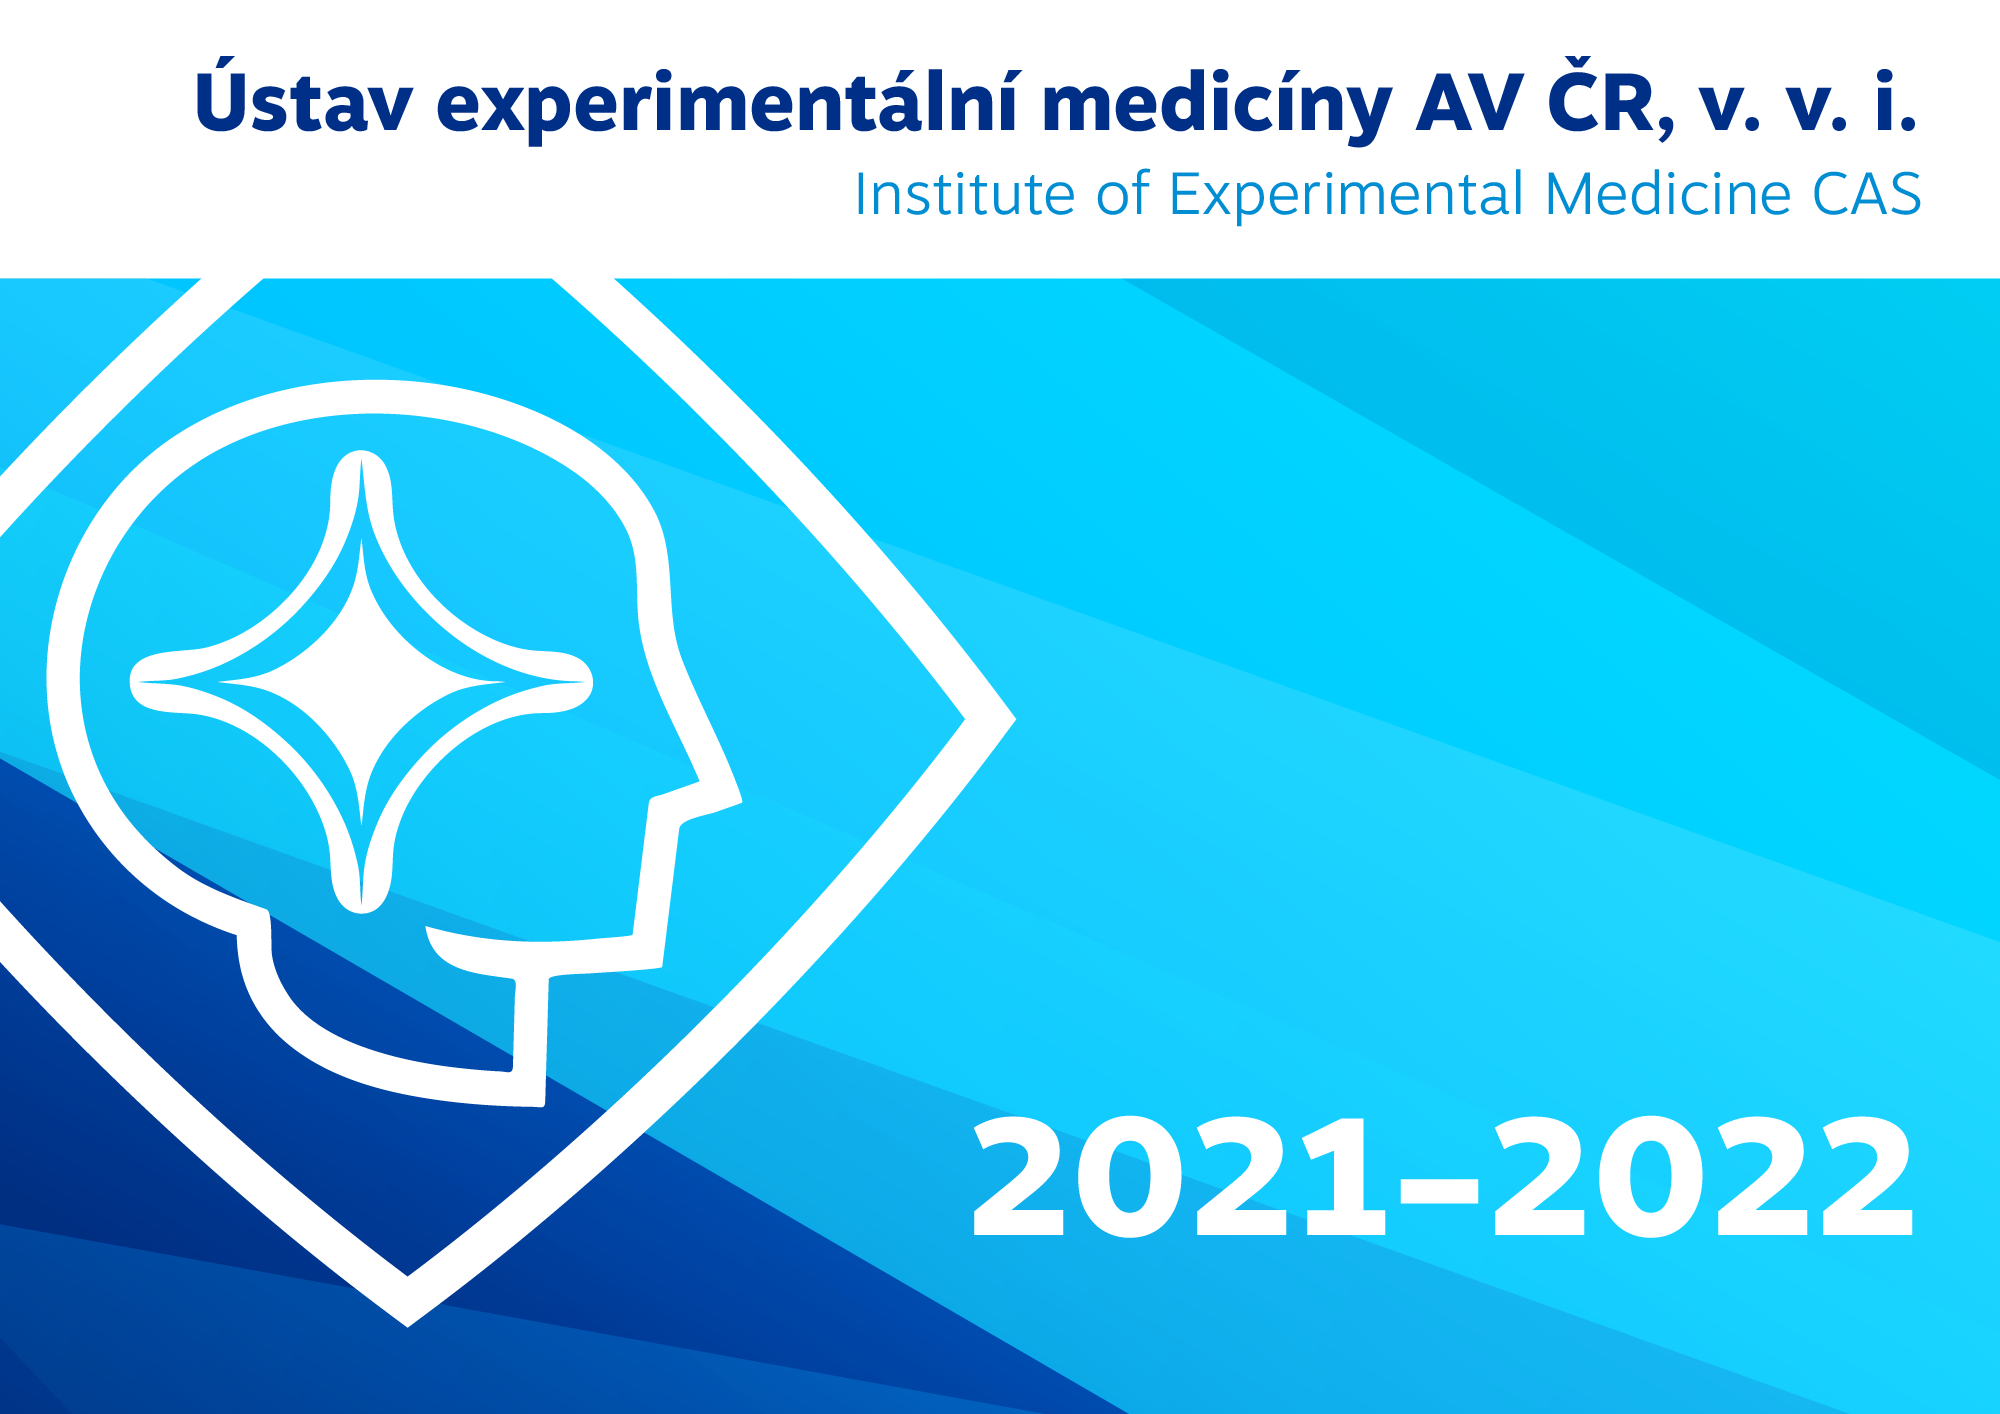 Title page of Annual Report of the Institute of Experimental Medicine of the Czech Academy of Sciences, Czech Republic for years 2021 and 2022.